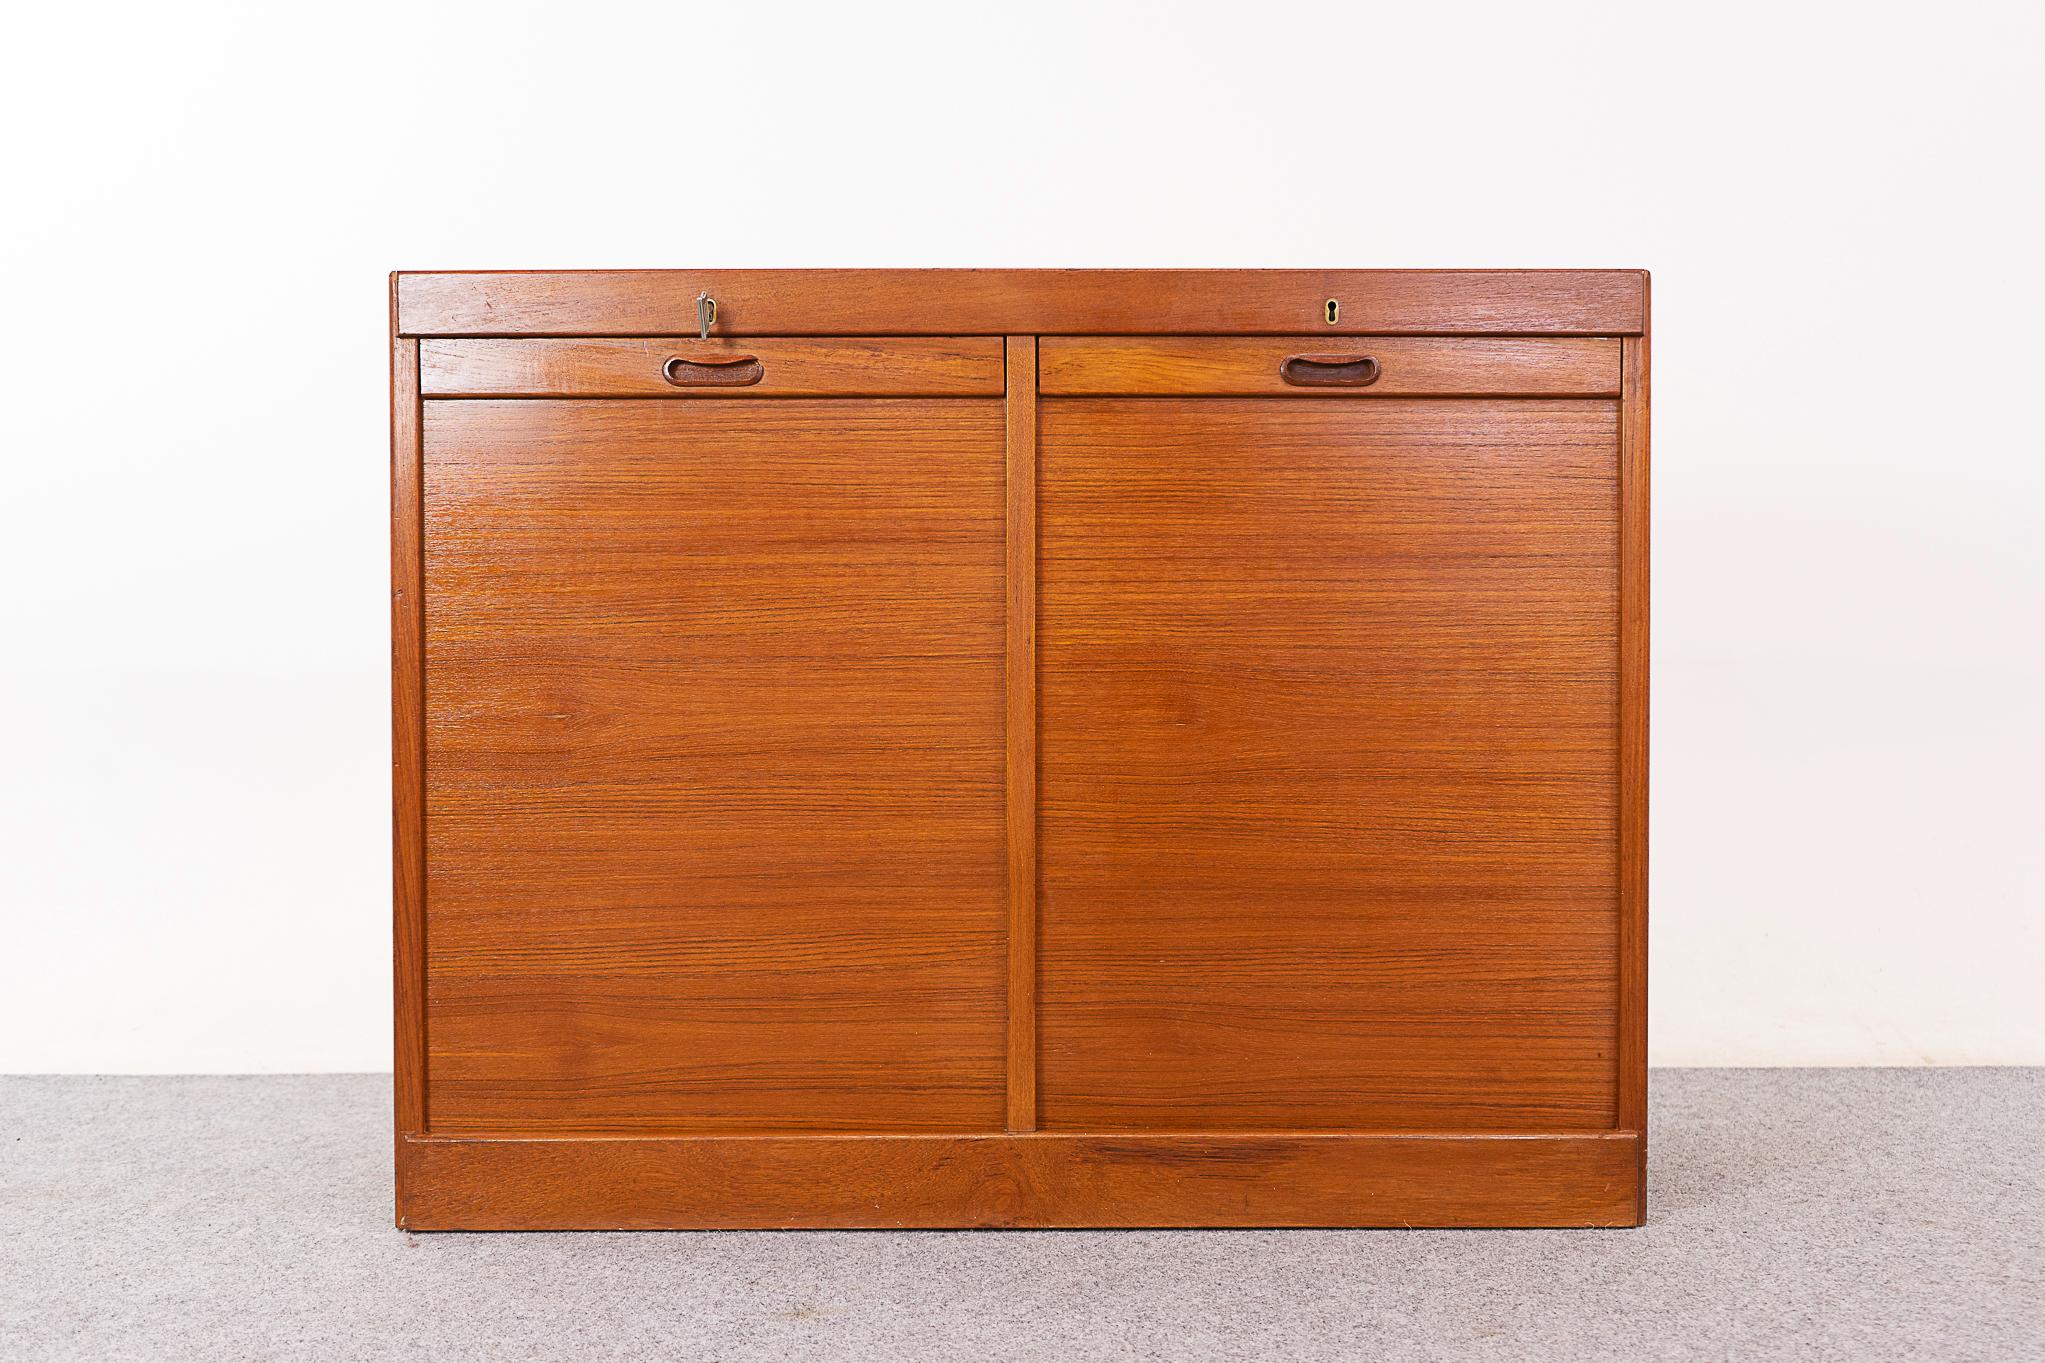 Teak Danish tambour door filing cabinet, circa 1960's. Compact double bank cabinet with locking tambour doors that magically disappear when opened. Interior drawers and file hanging system. Low enough to hang art above, or place a lovely Danish